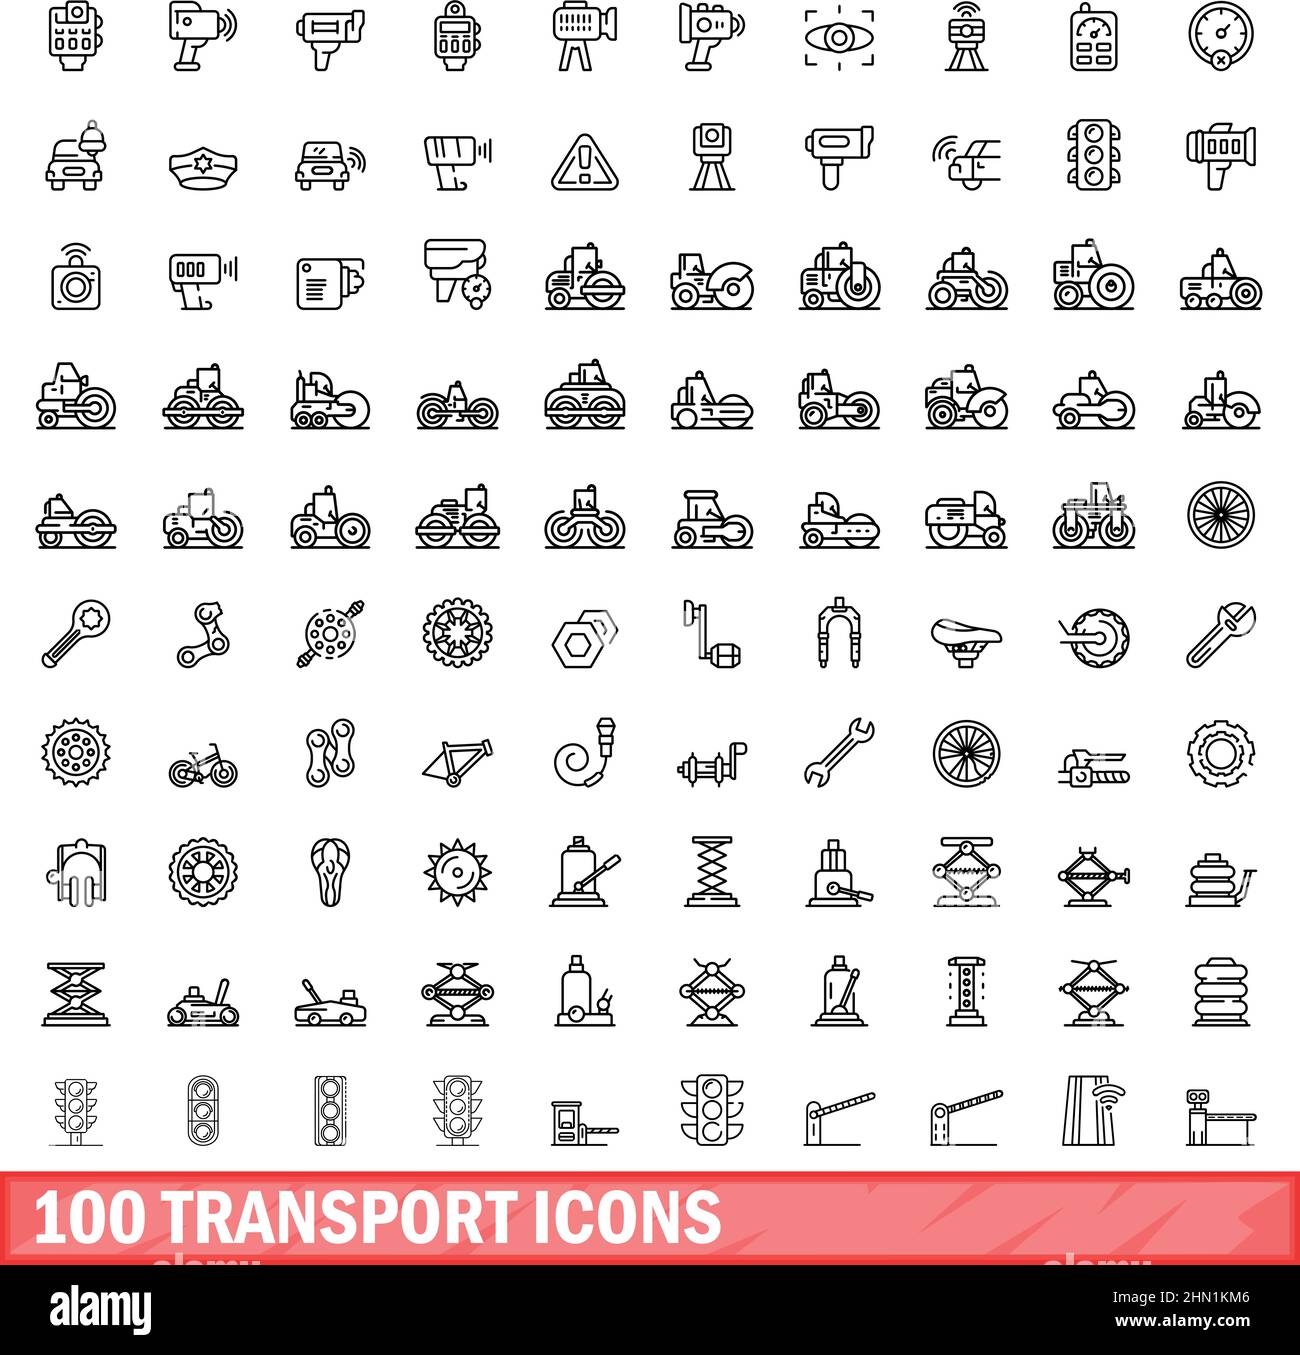 100 transport icons set. Outline illustration of 100 transport icons vector set isolated on white background Stock Vector